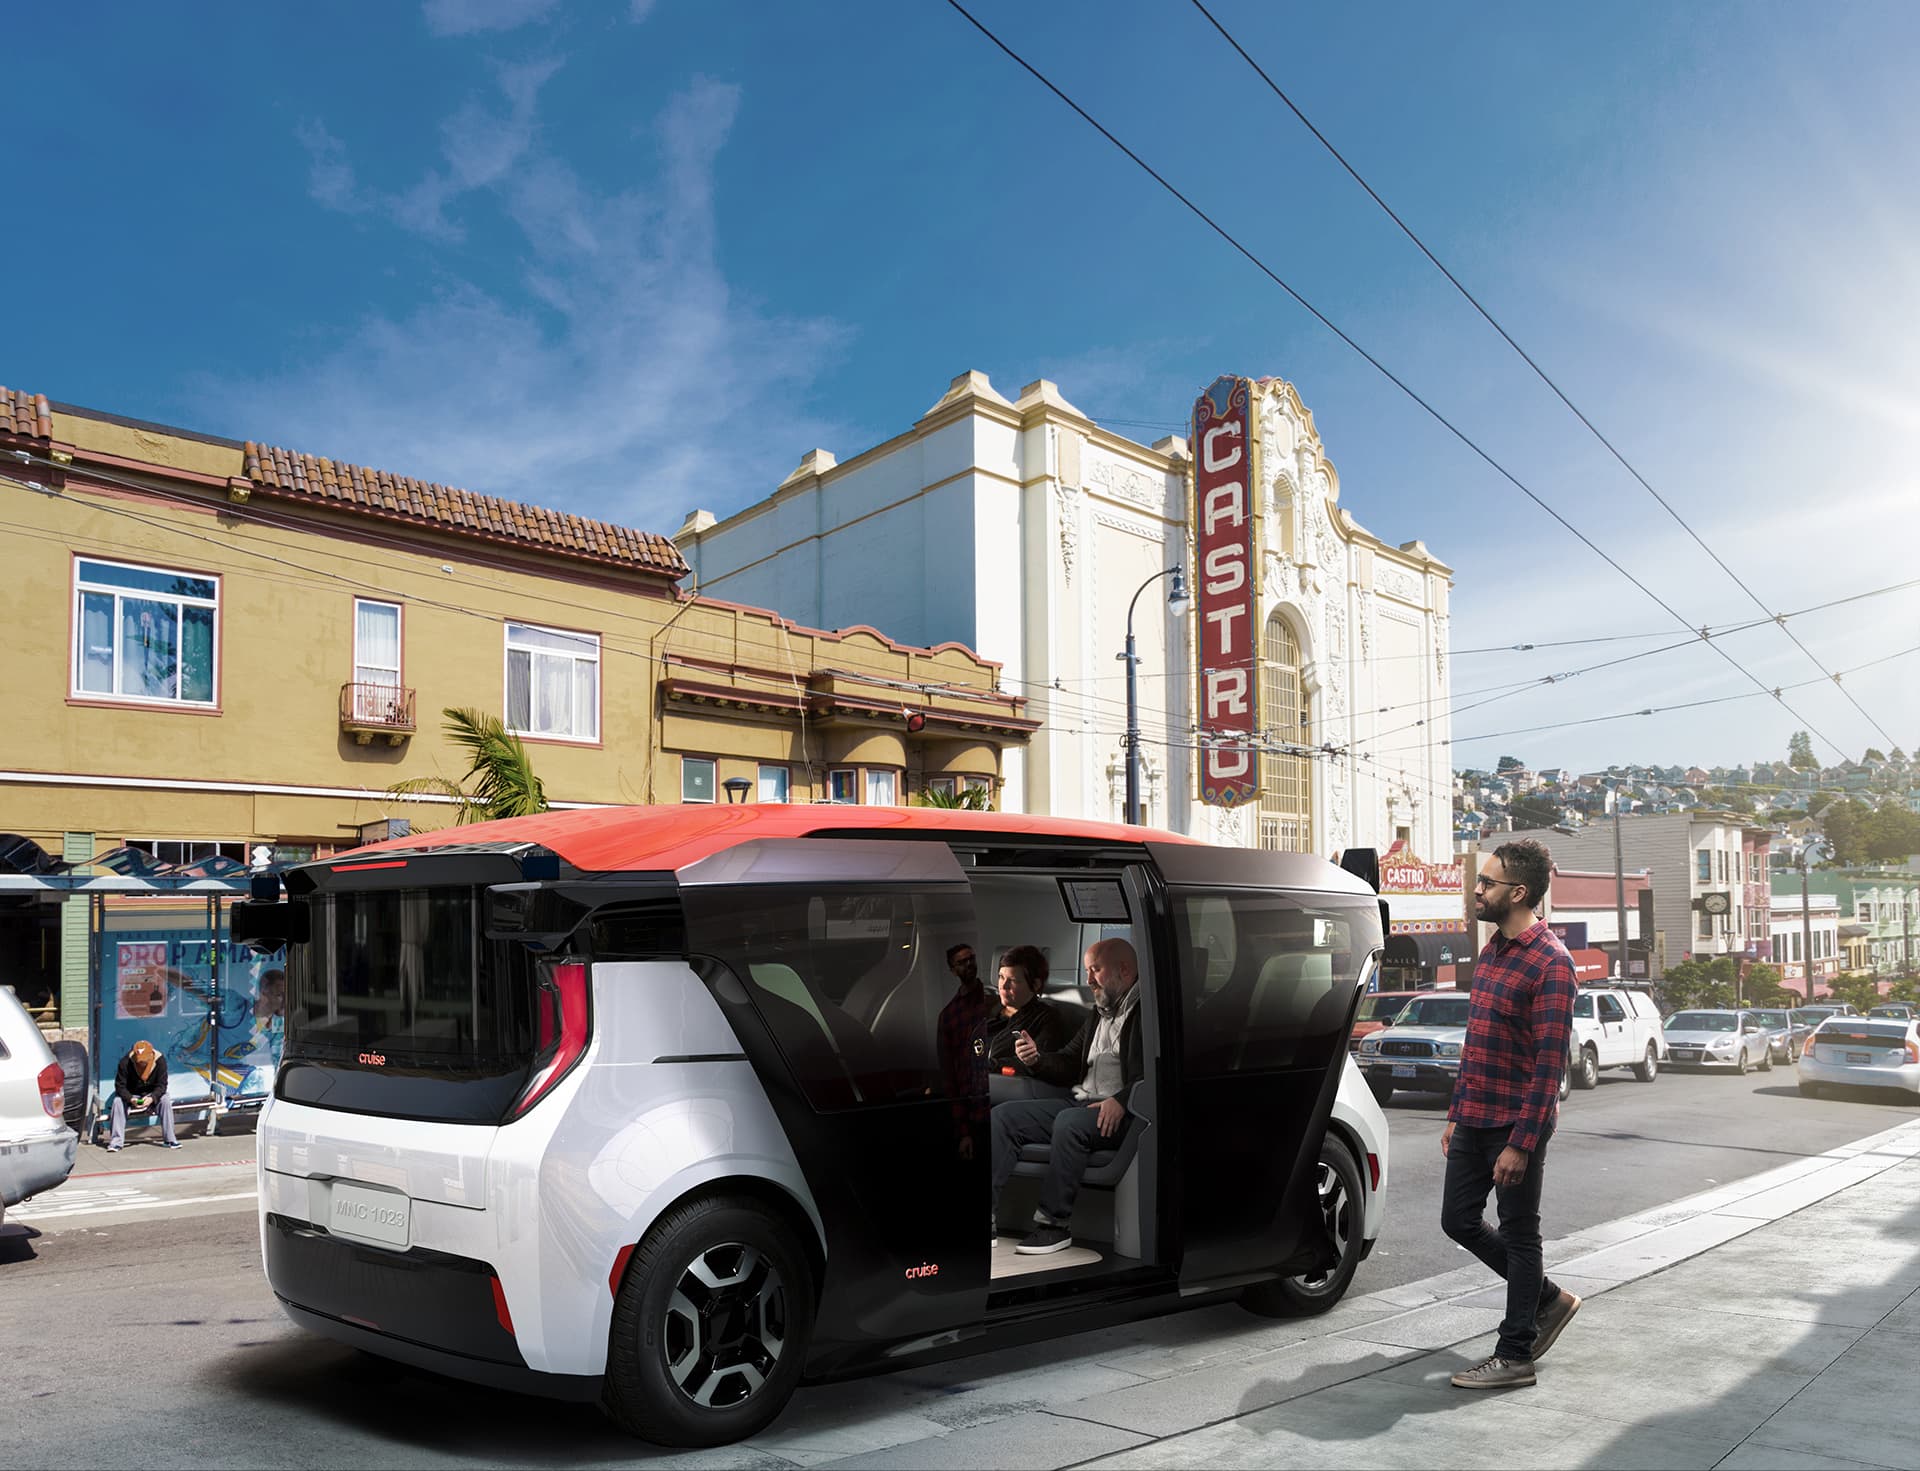 GM-backed Cruise seeks final approval for robotaxis in San Francisco